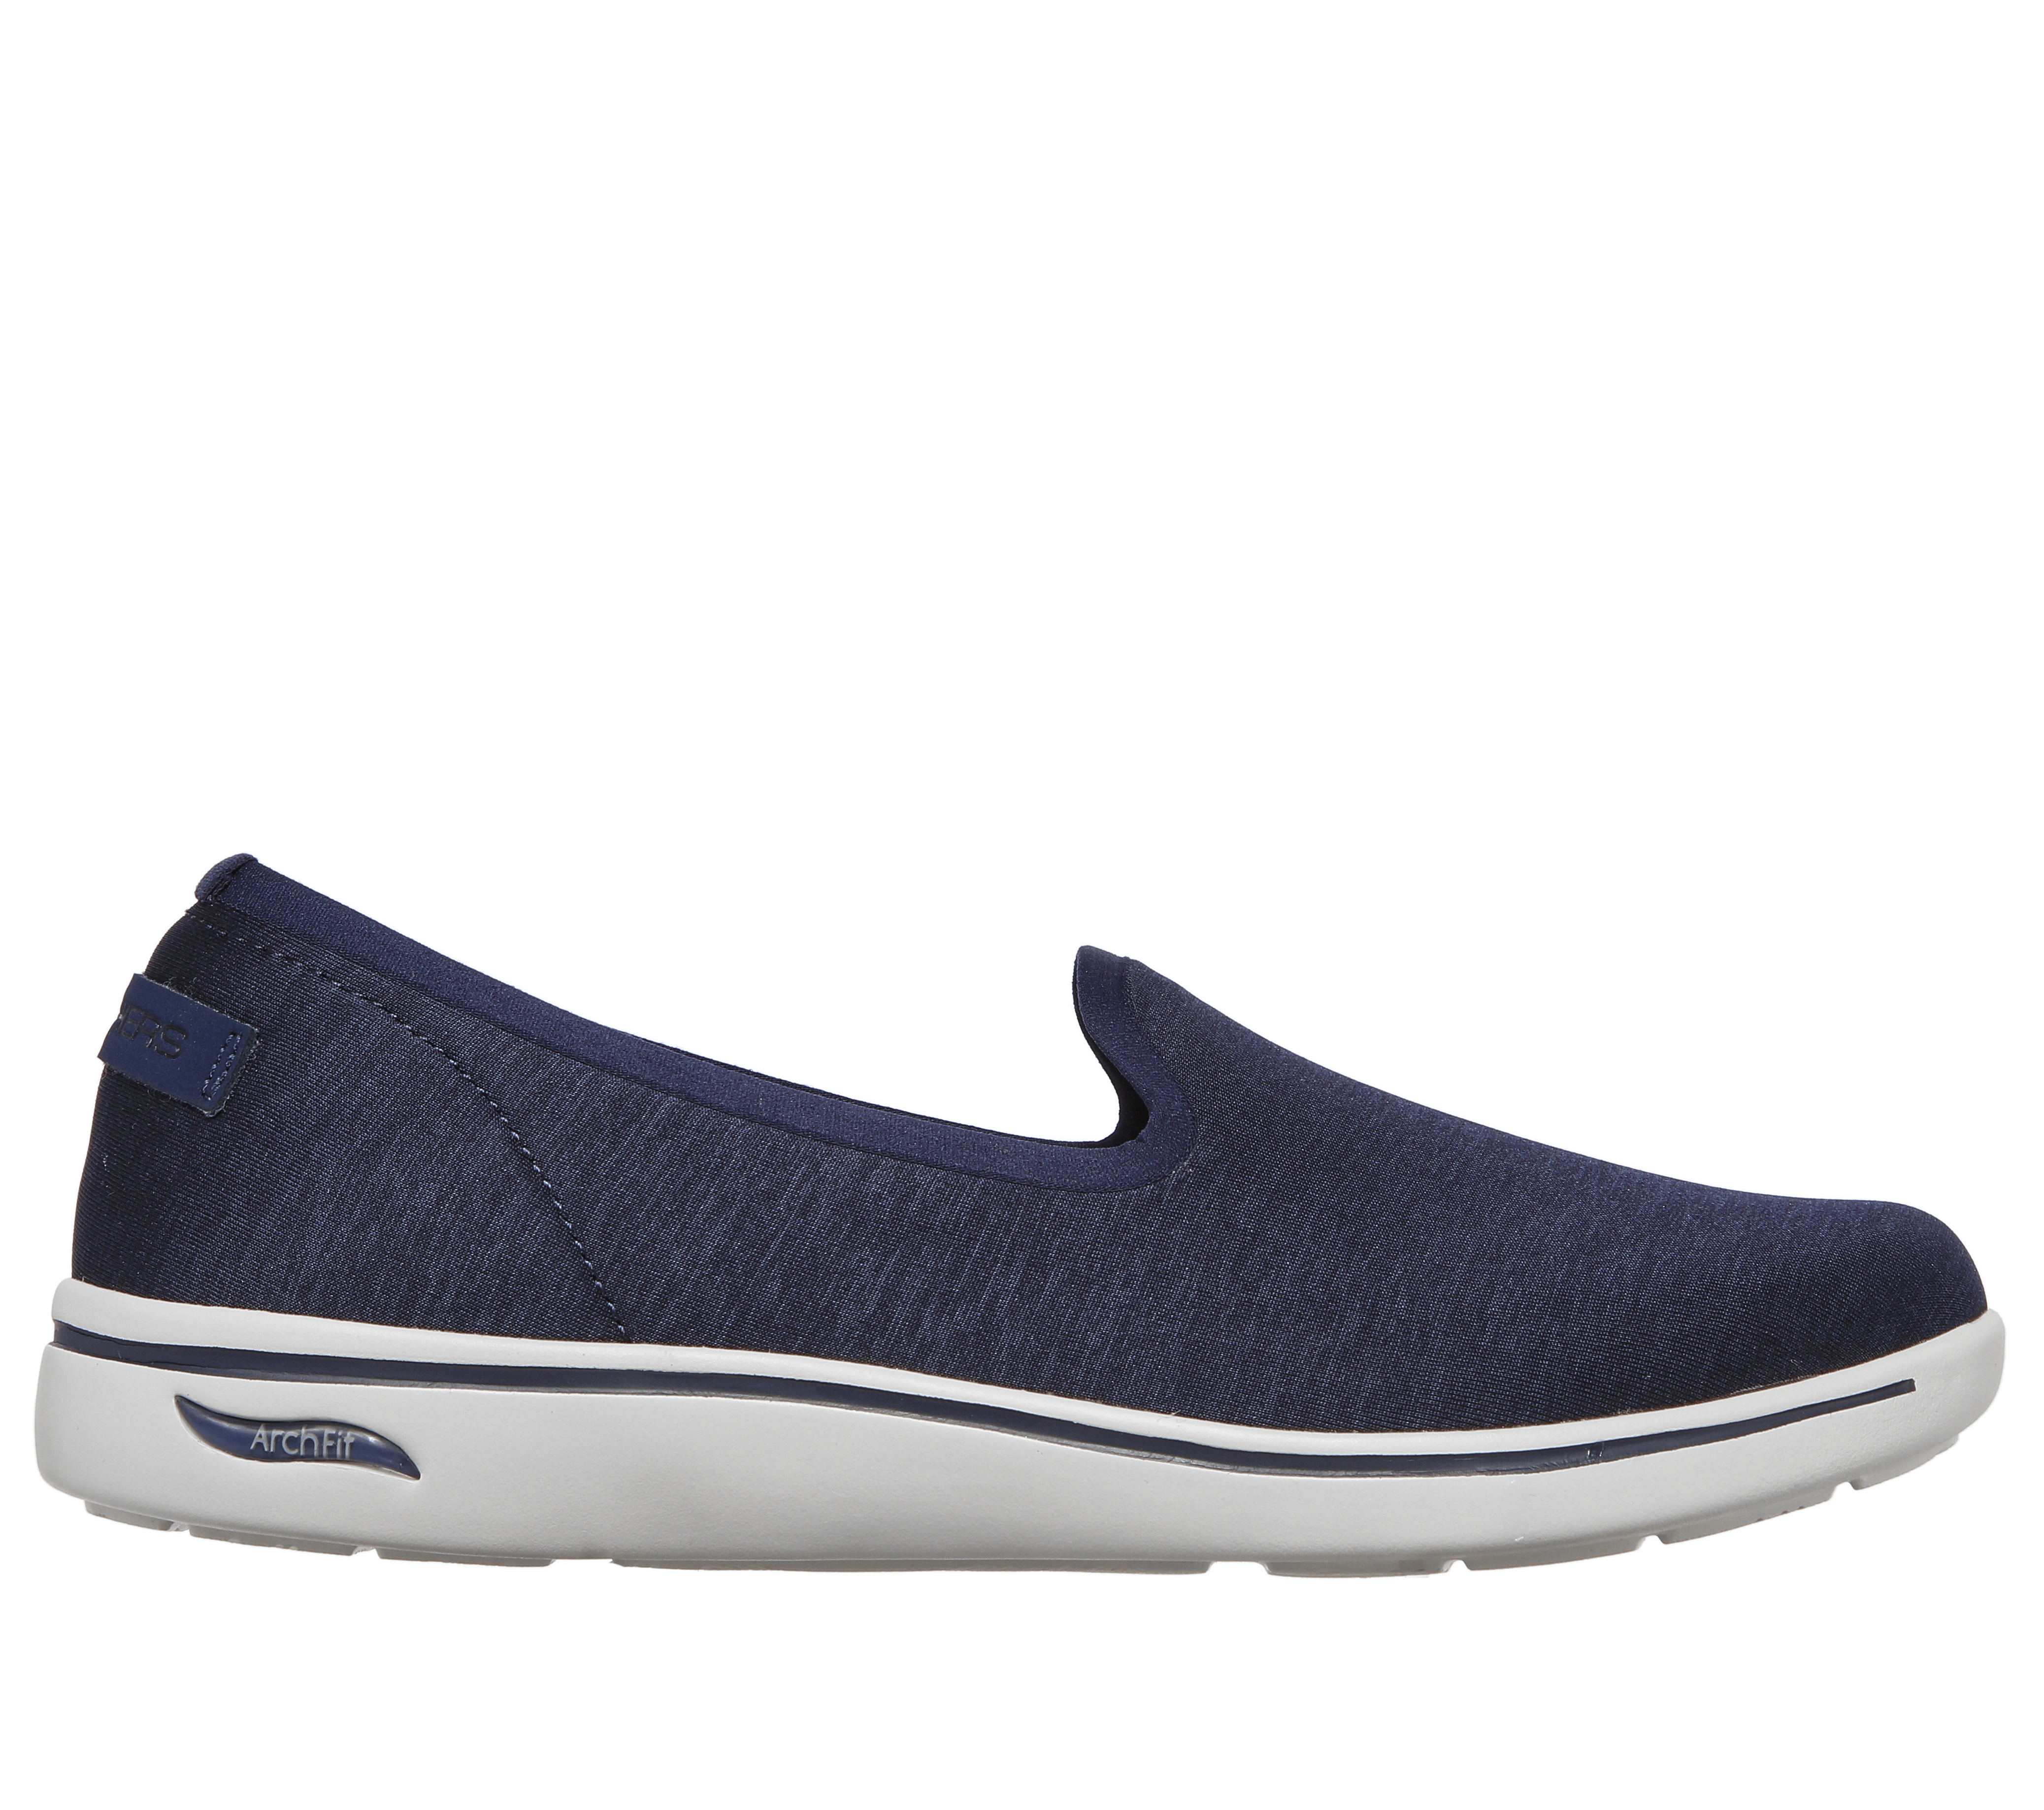 Shop the Skechers Arch Fit Uplift - Perceived | SKECHERS